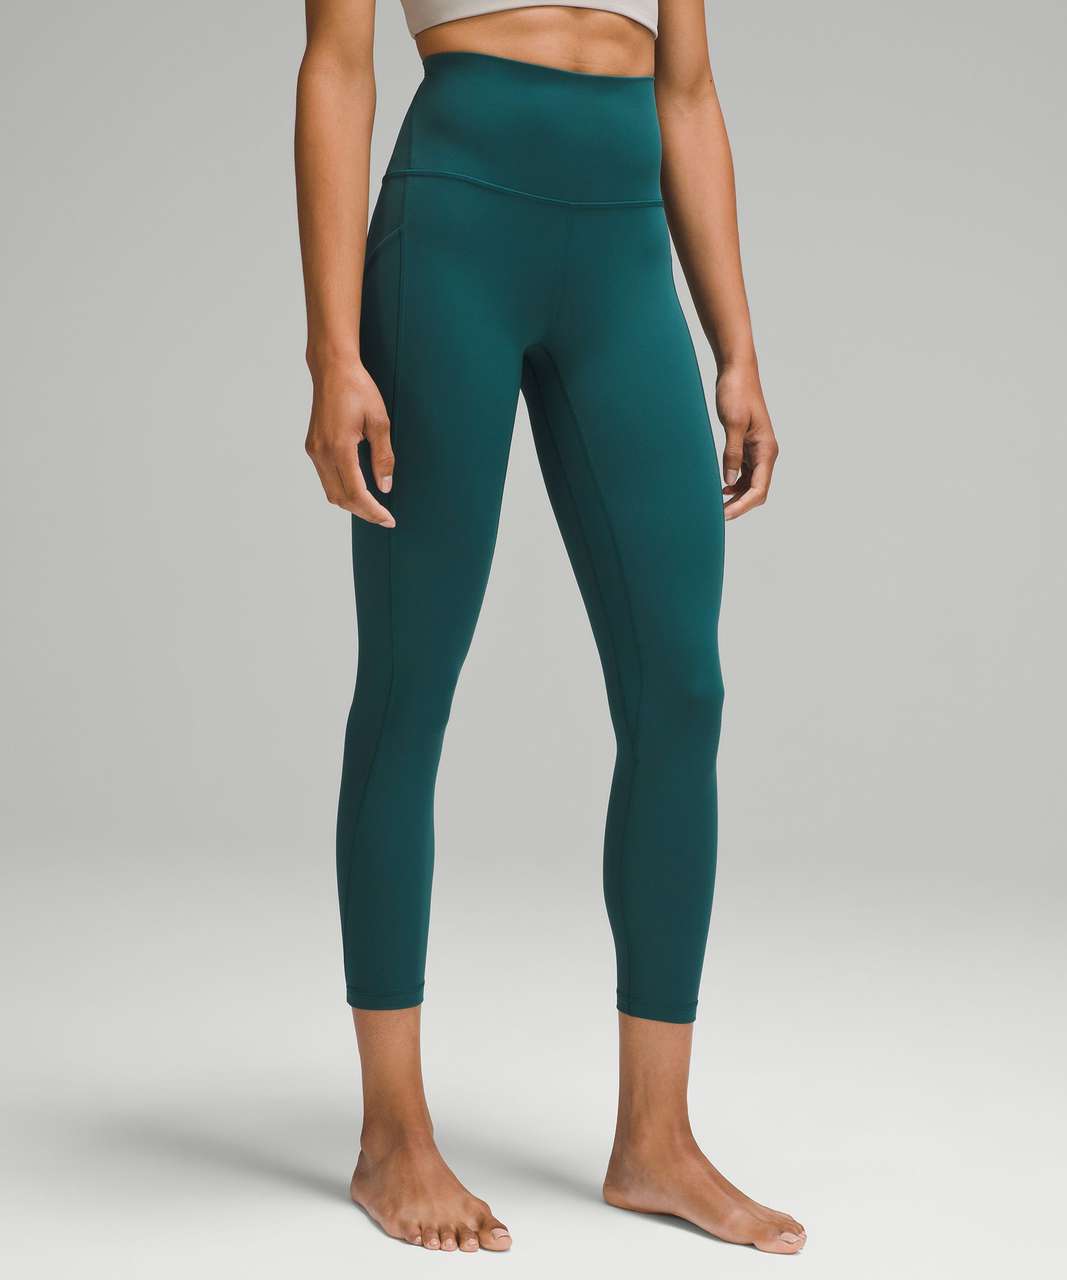 Lululemon Align High-Rise Pant with Pockets 25" - Storm Teal